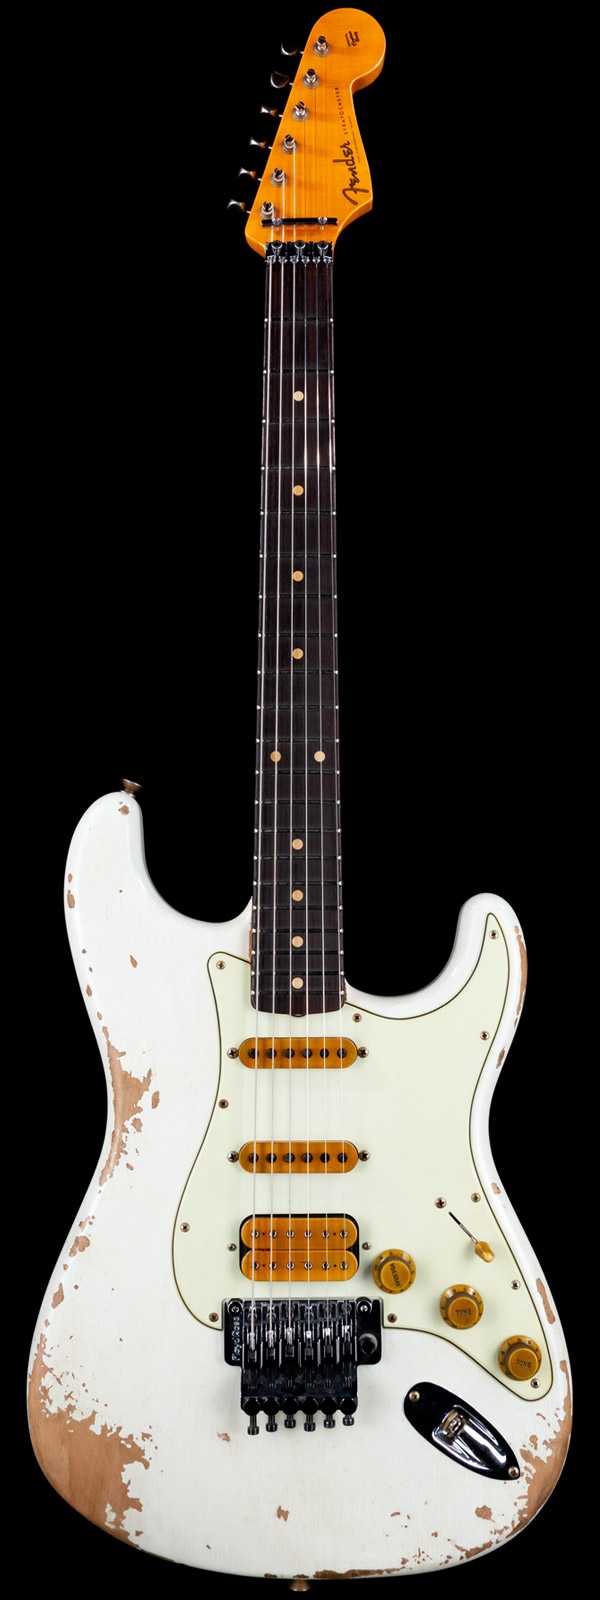 Fender Custom Shop Alley Cat Stratocaster Heavy Relic HSS Floyd Rose Rosewood Board Olympic White